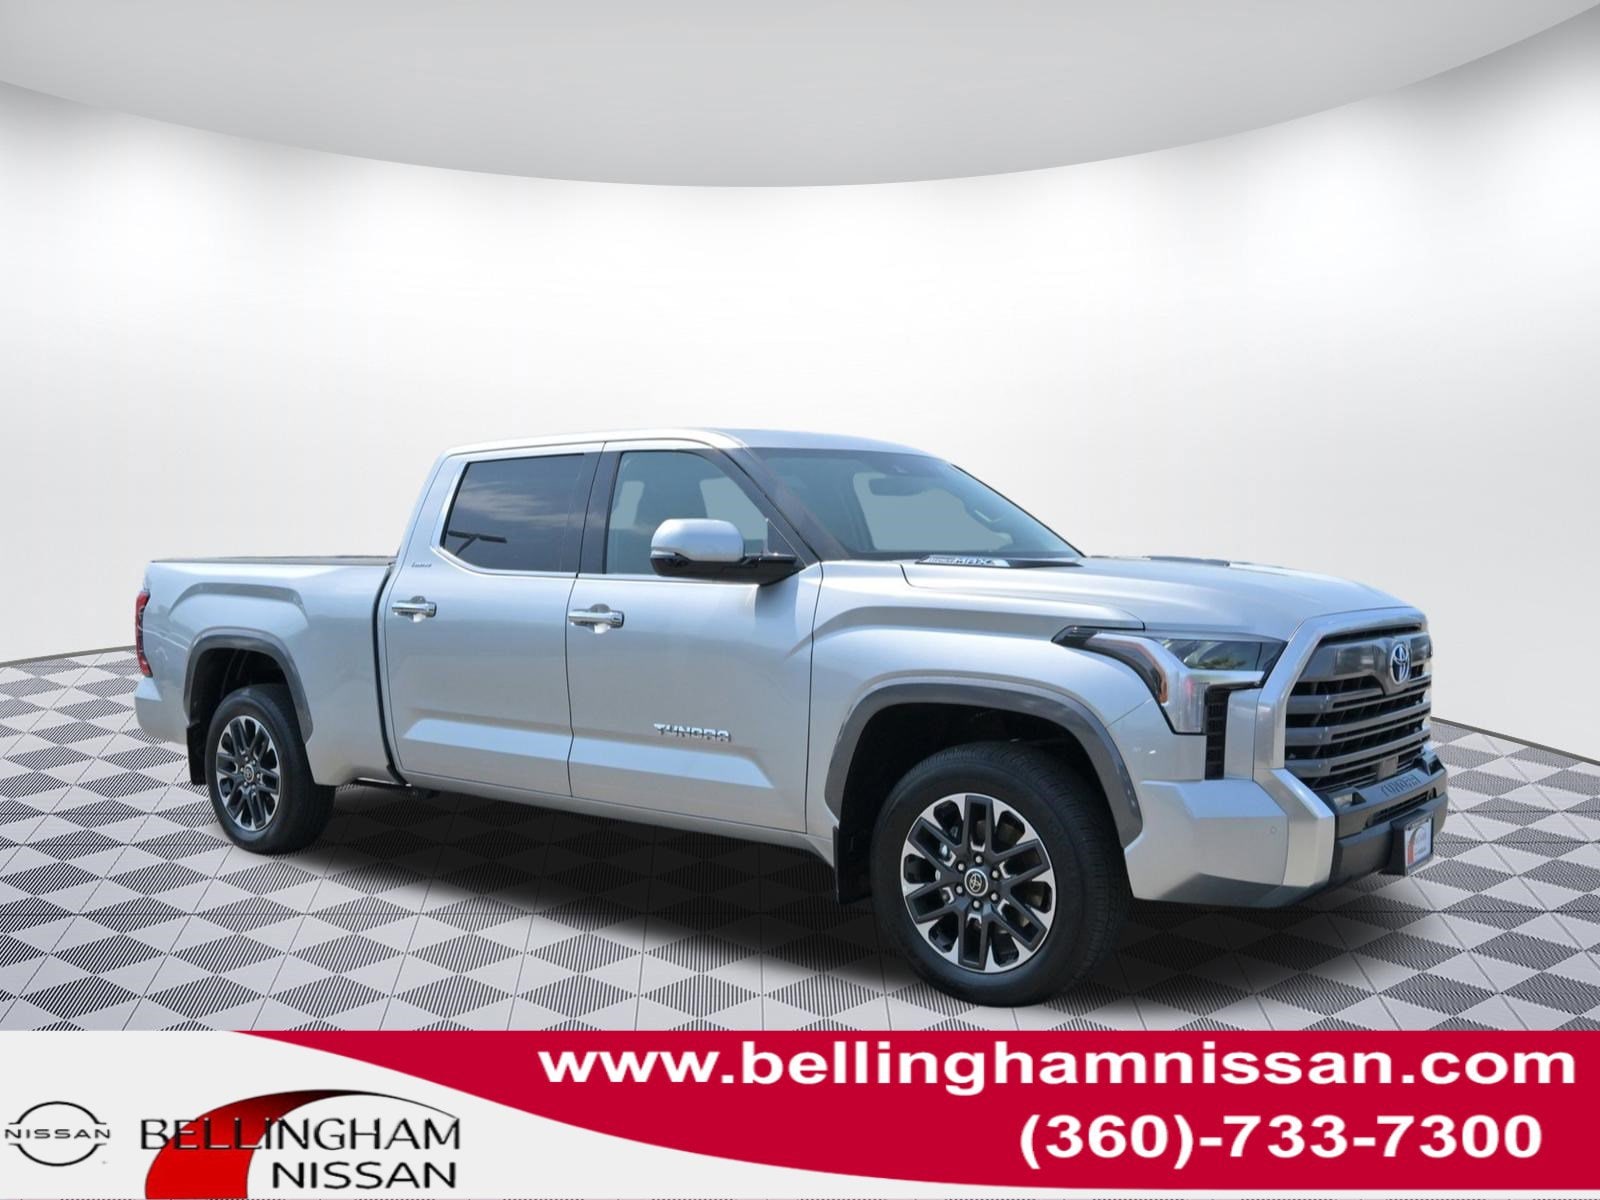 Used 2023 Toyota Tundra For Sale at Bellingham Nissan | VIN 